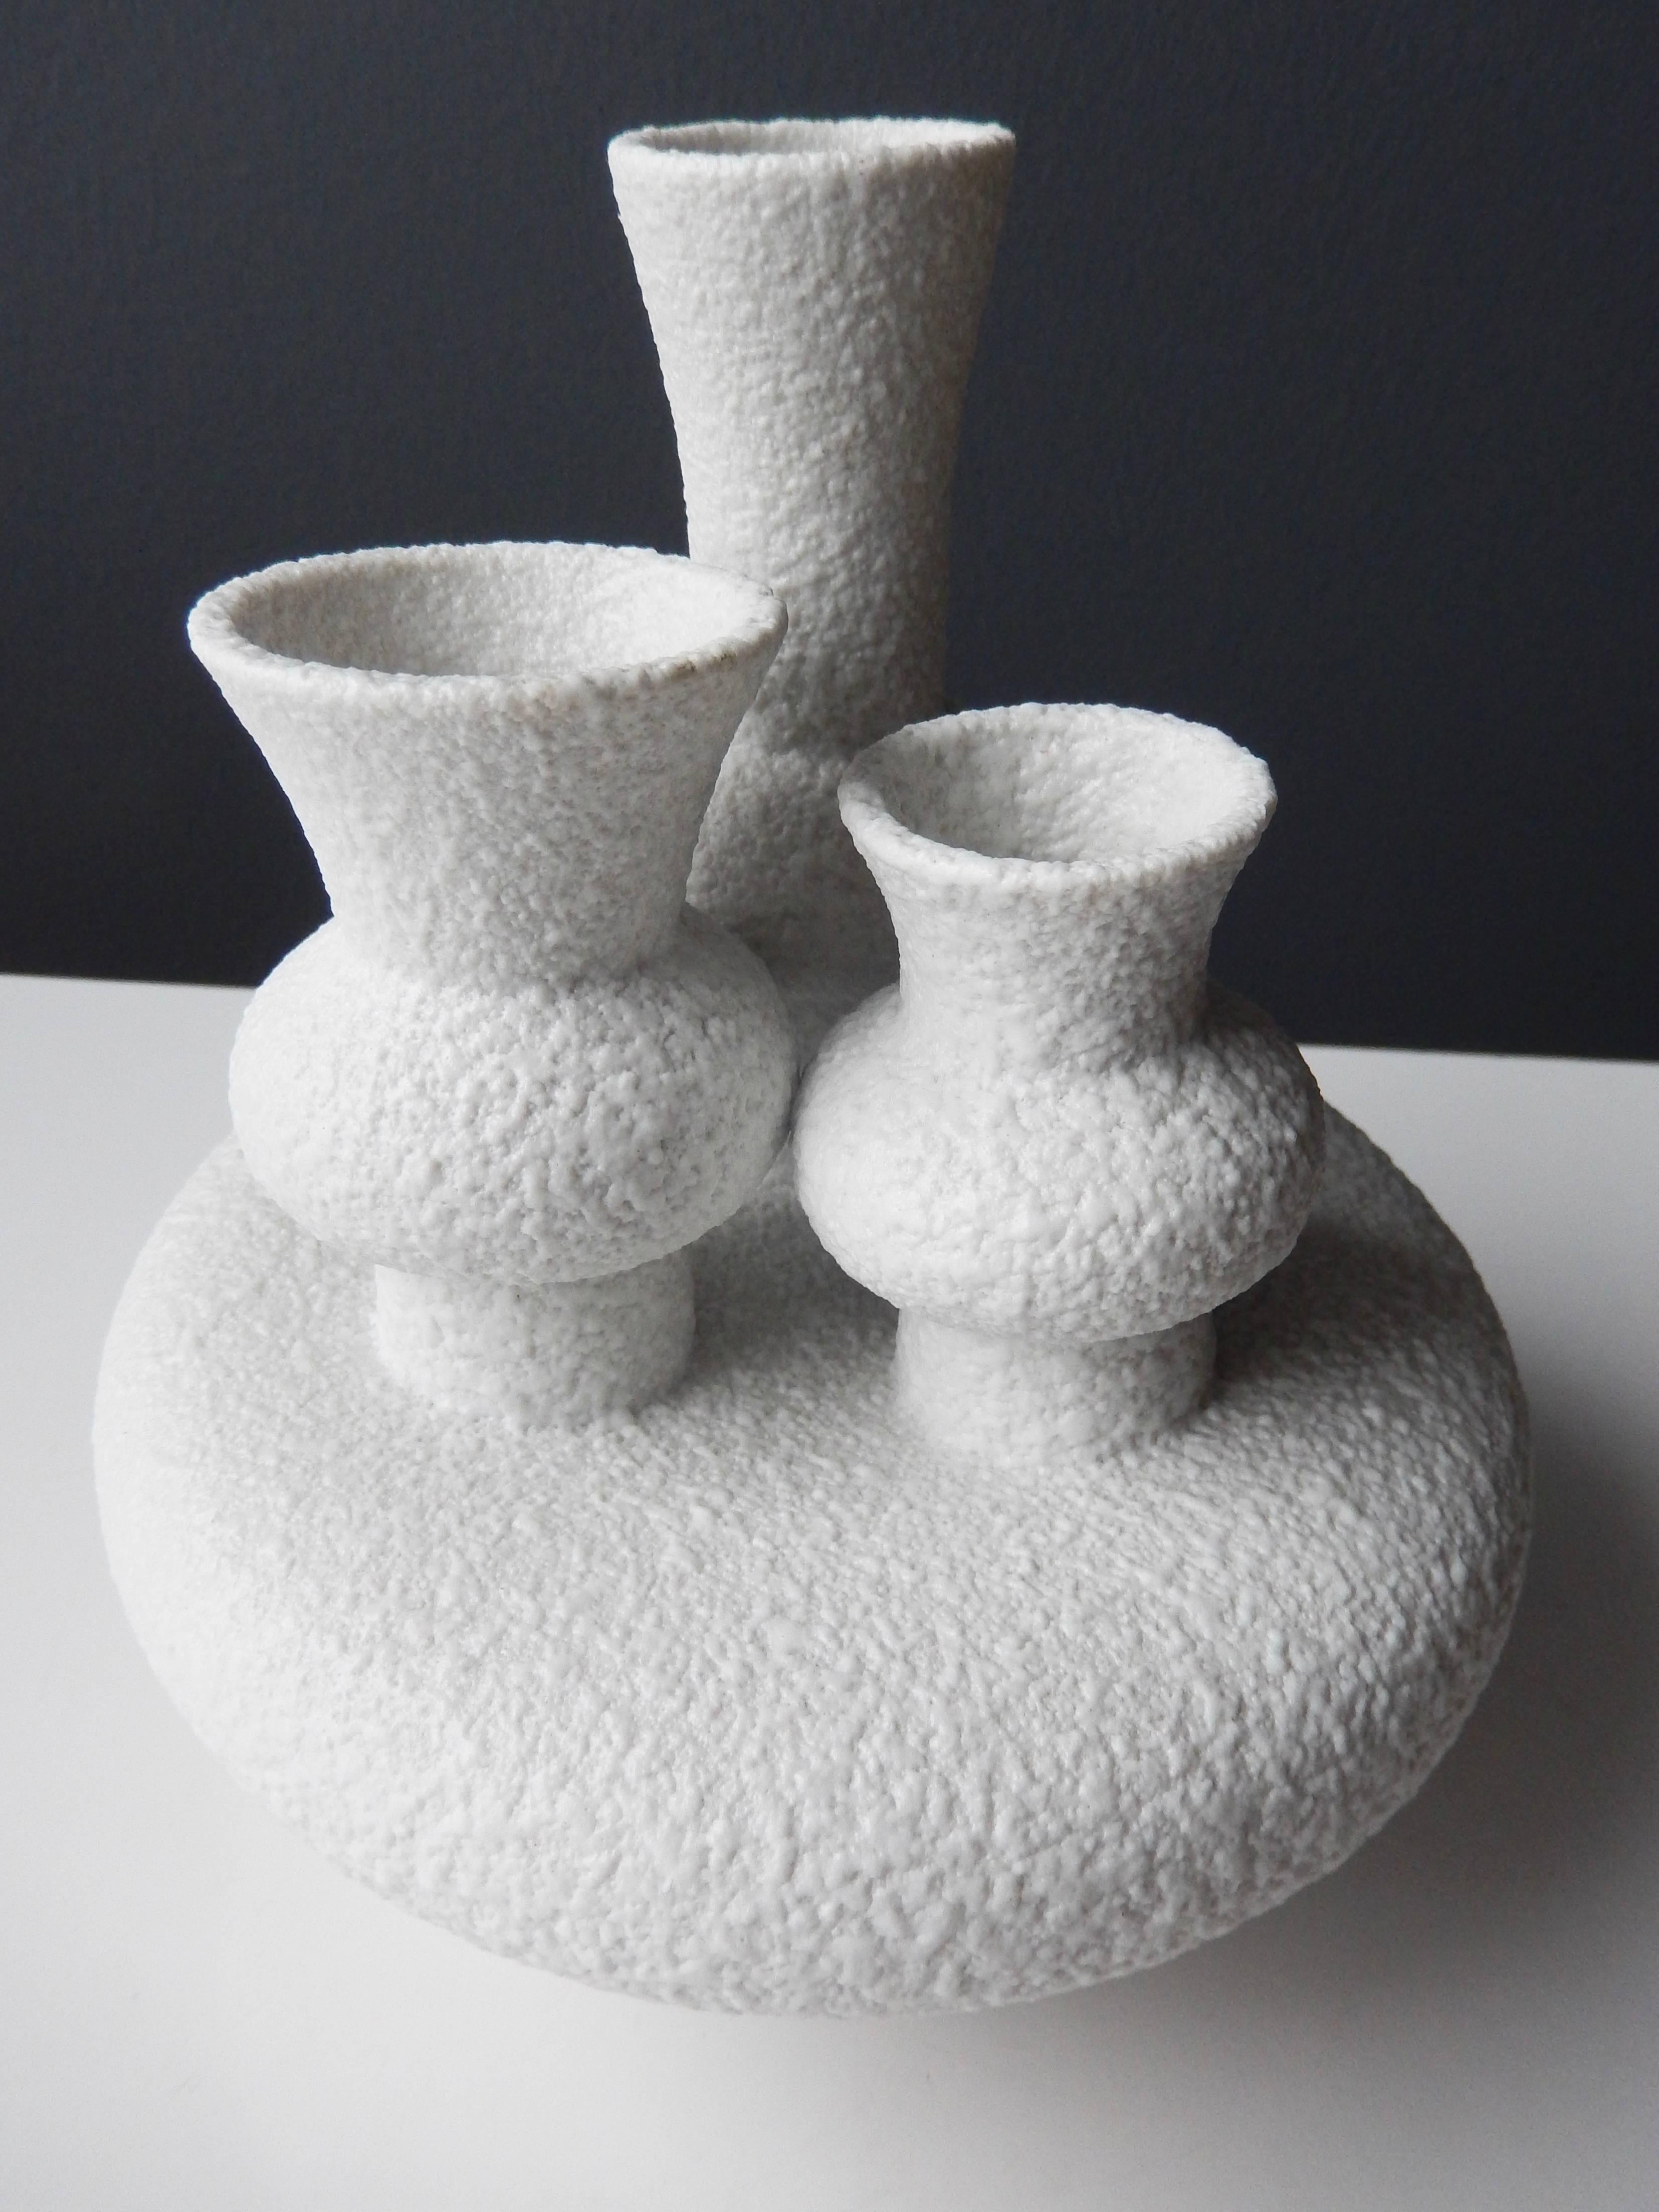 A sculptural Sgrafo Modern Korallenform vase with modernistic forms atop a circular, pod-like base. The unusual design recalls Gaudi's idiosyncratic forms. A bold, unique example of postwar German ceramics. Signed and numbered.